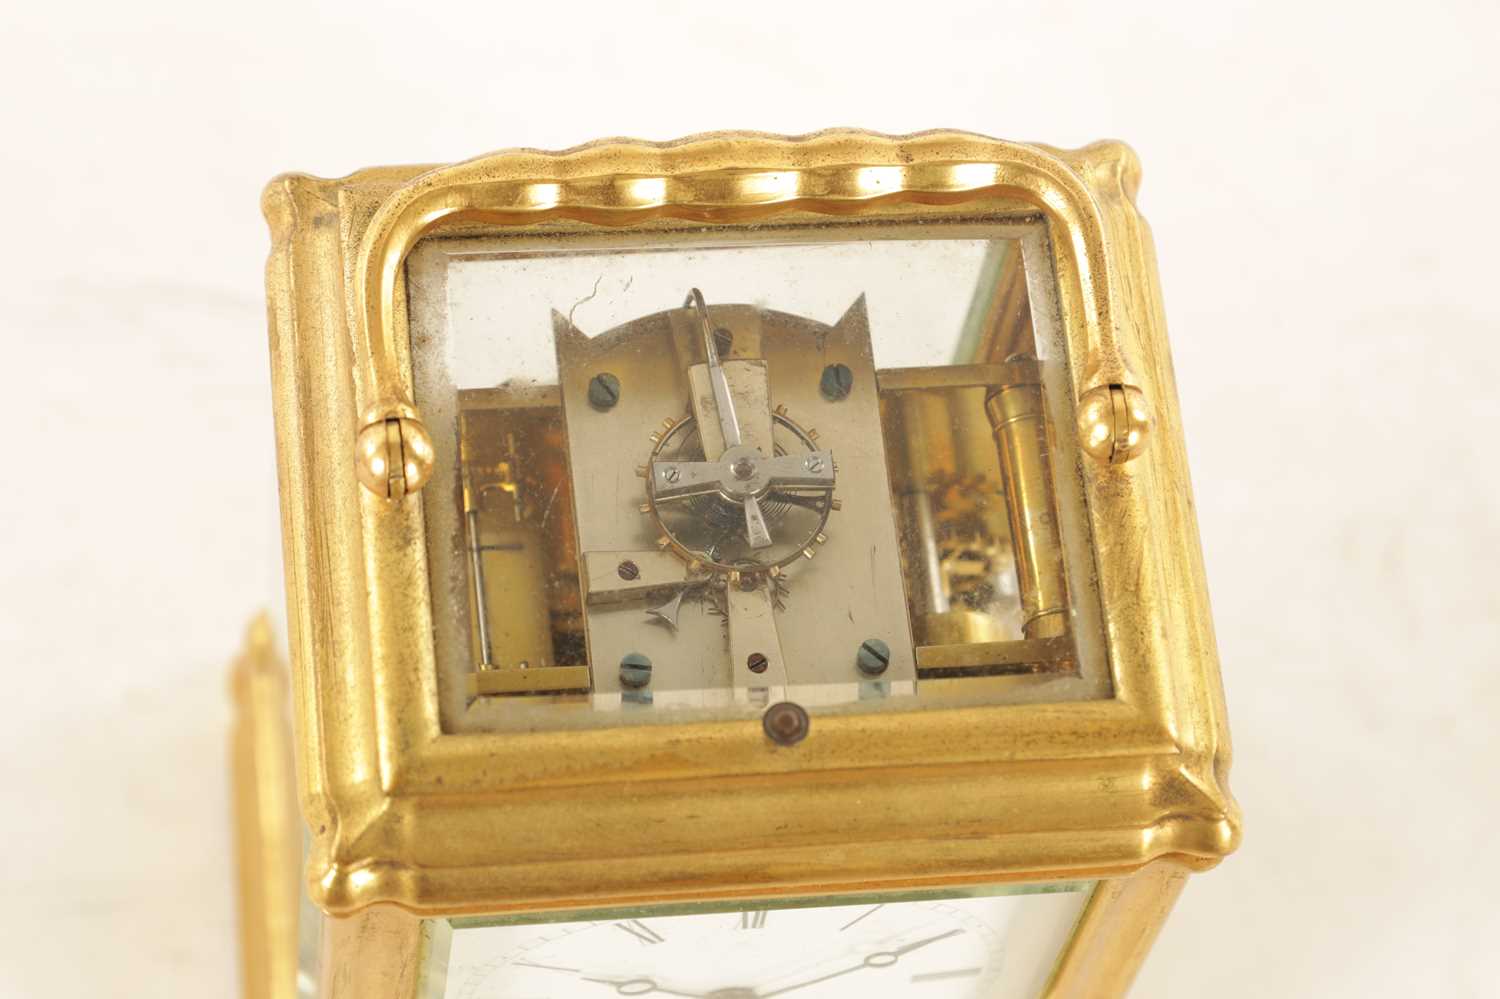 A GOOD 19TH CENTURY FRENCH REPEATING CARRIAGE CLOCK WITH ALARM - Image 4 of 15